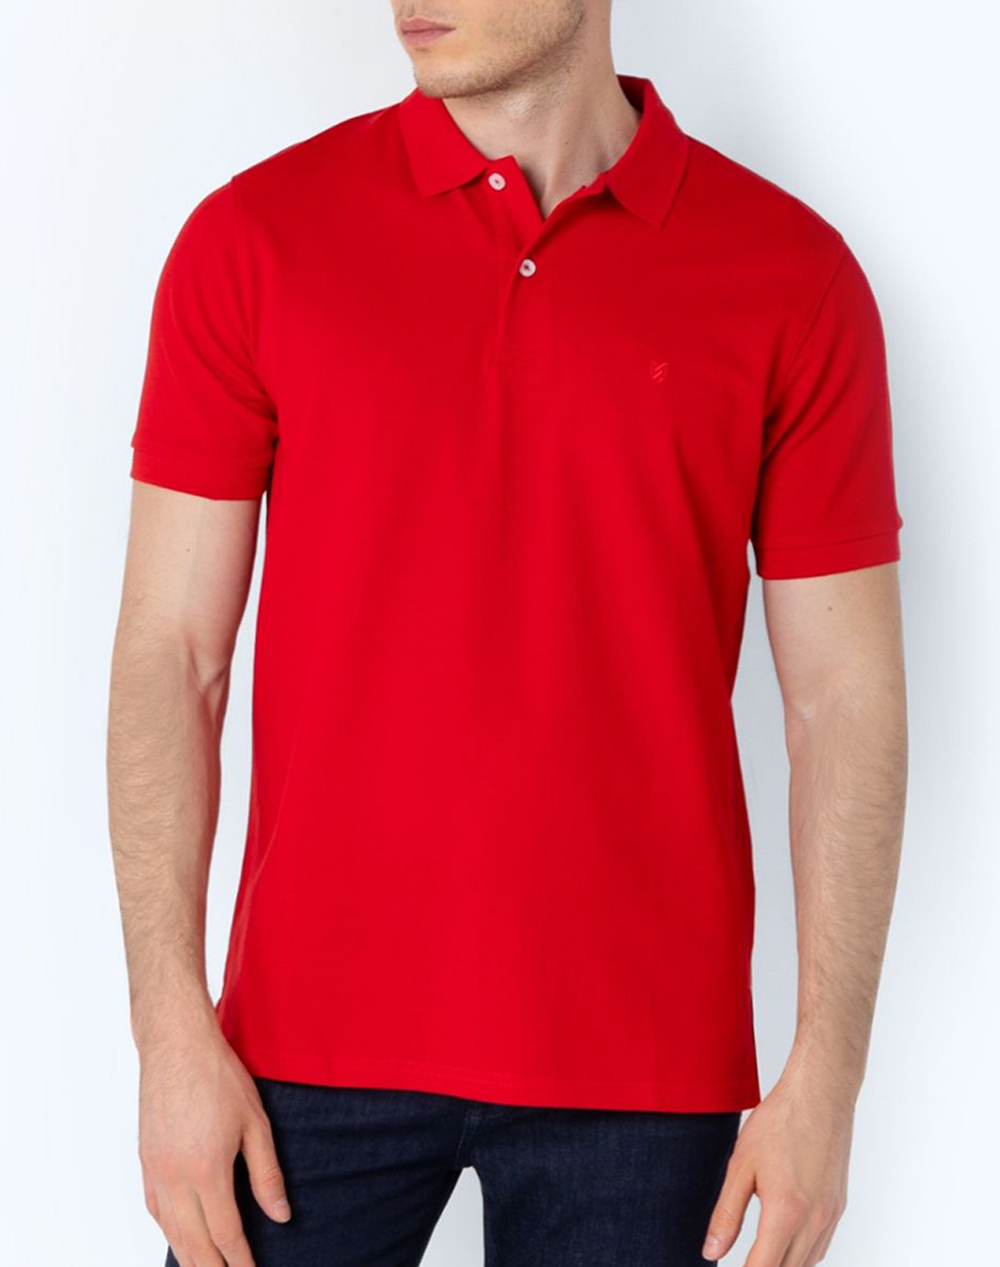 THE BOSTONIANS ΜΠΛΟΥΖΑ POLO PIQUE REGULAR FIT 3PS0001Pomegranate FireRed